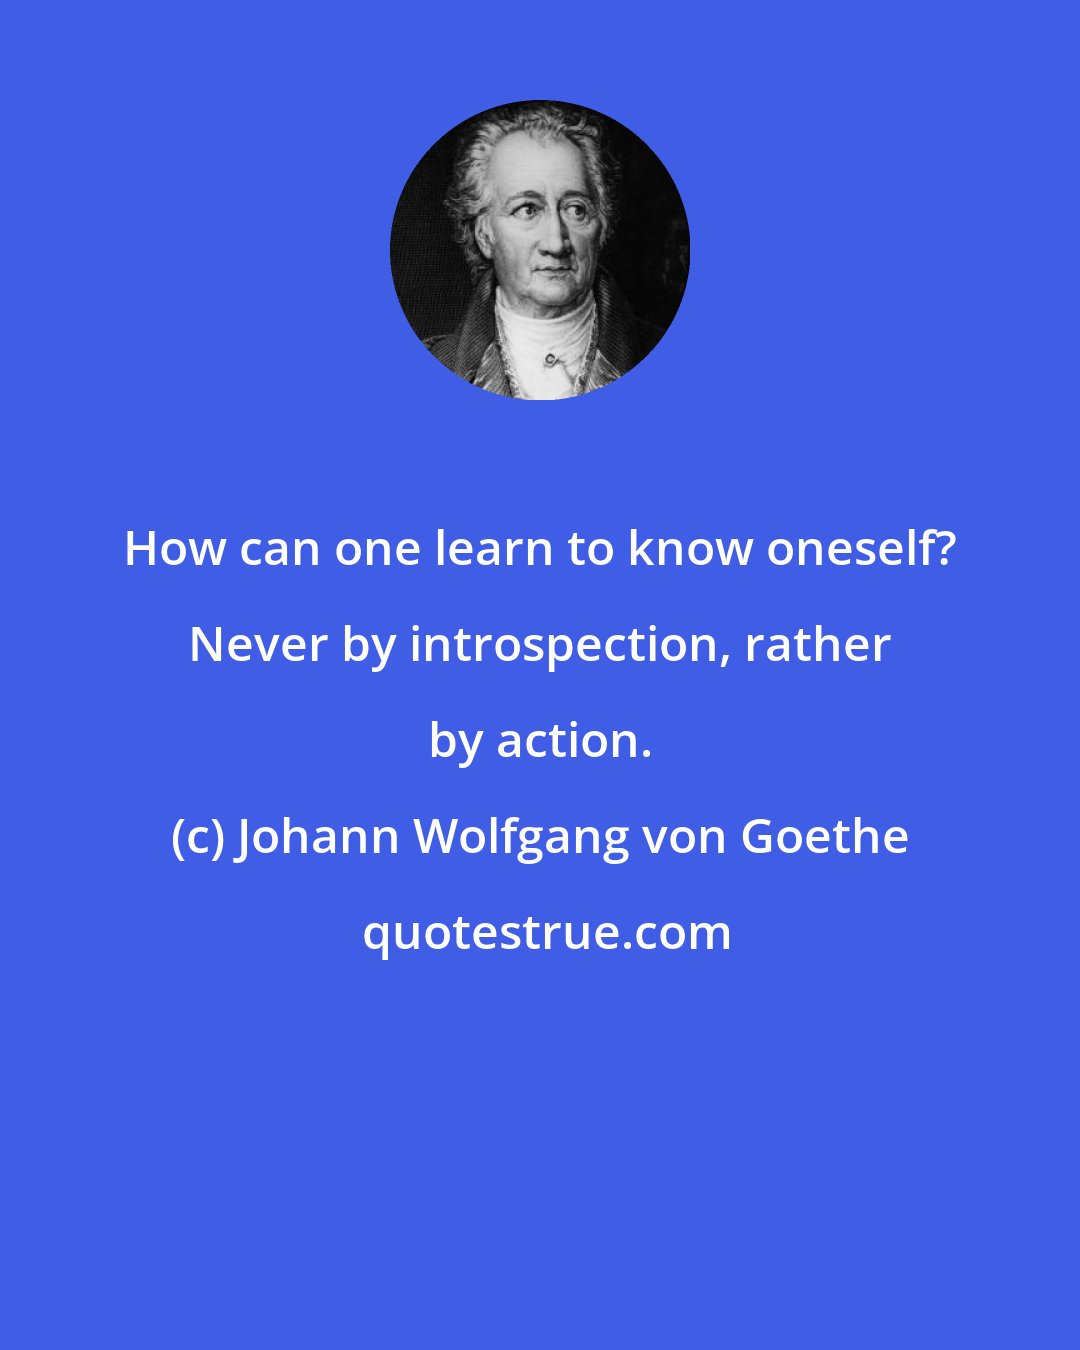 Johann Wolfgang von Goethe: How can one learn to know oneself? Never by introspection, rather by action.